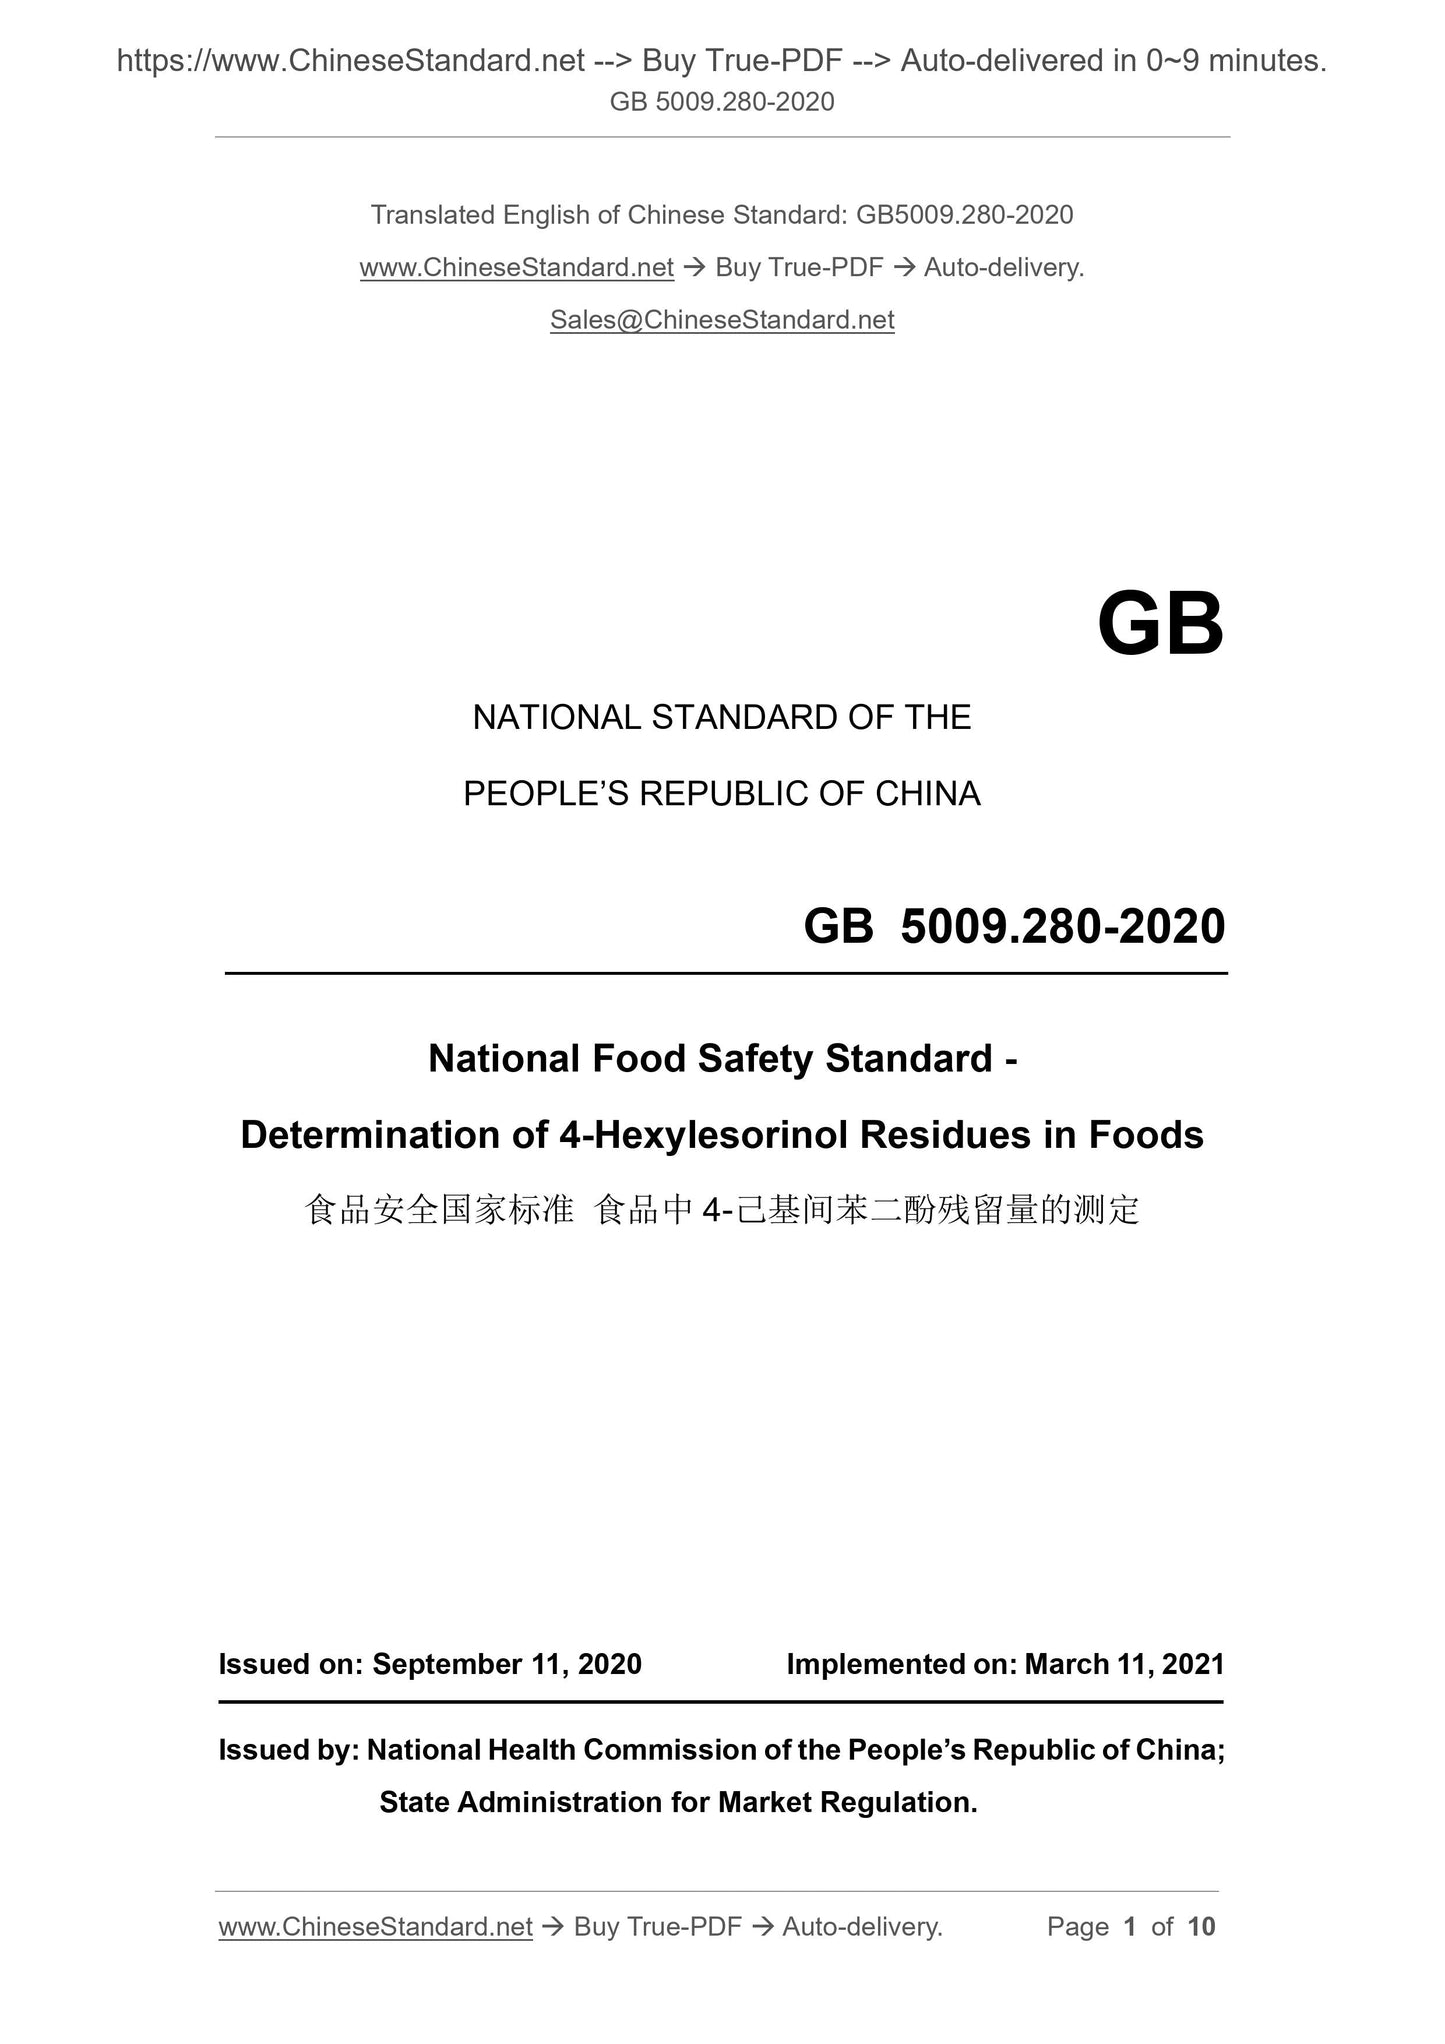 GB 5009.280-2020 Page 1